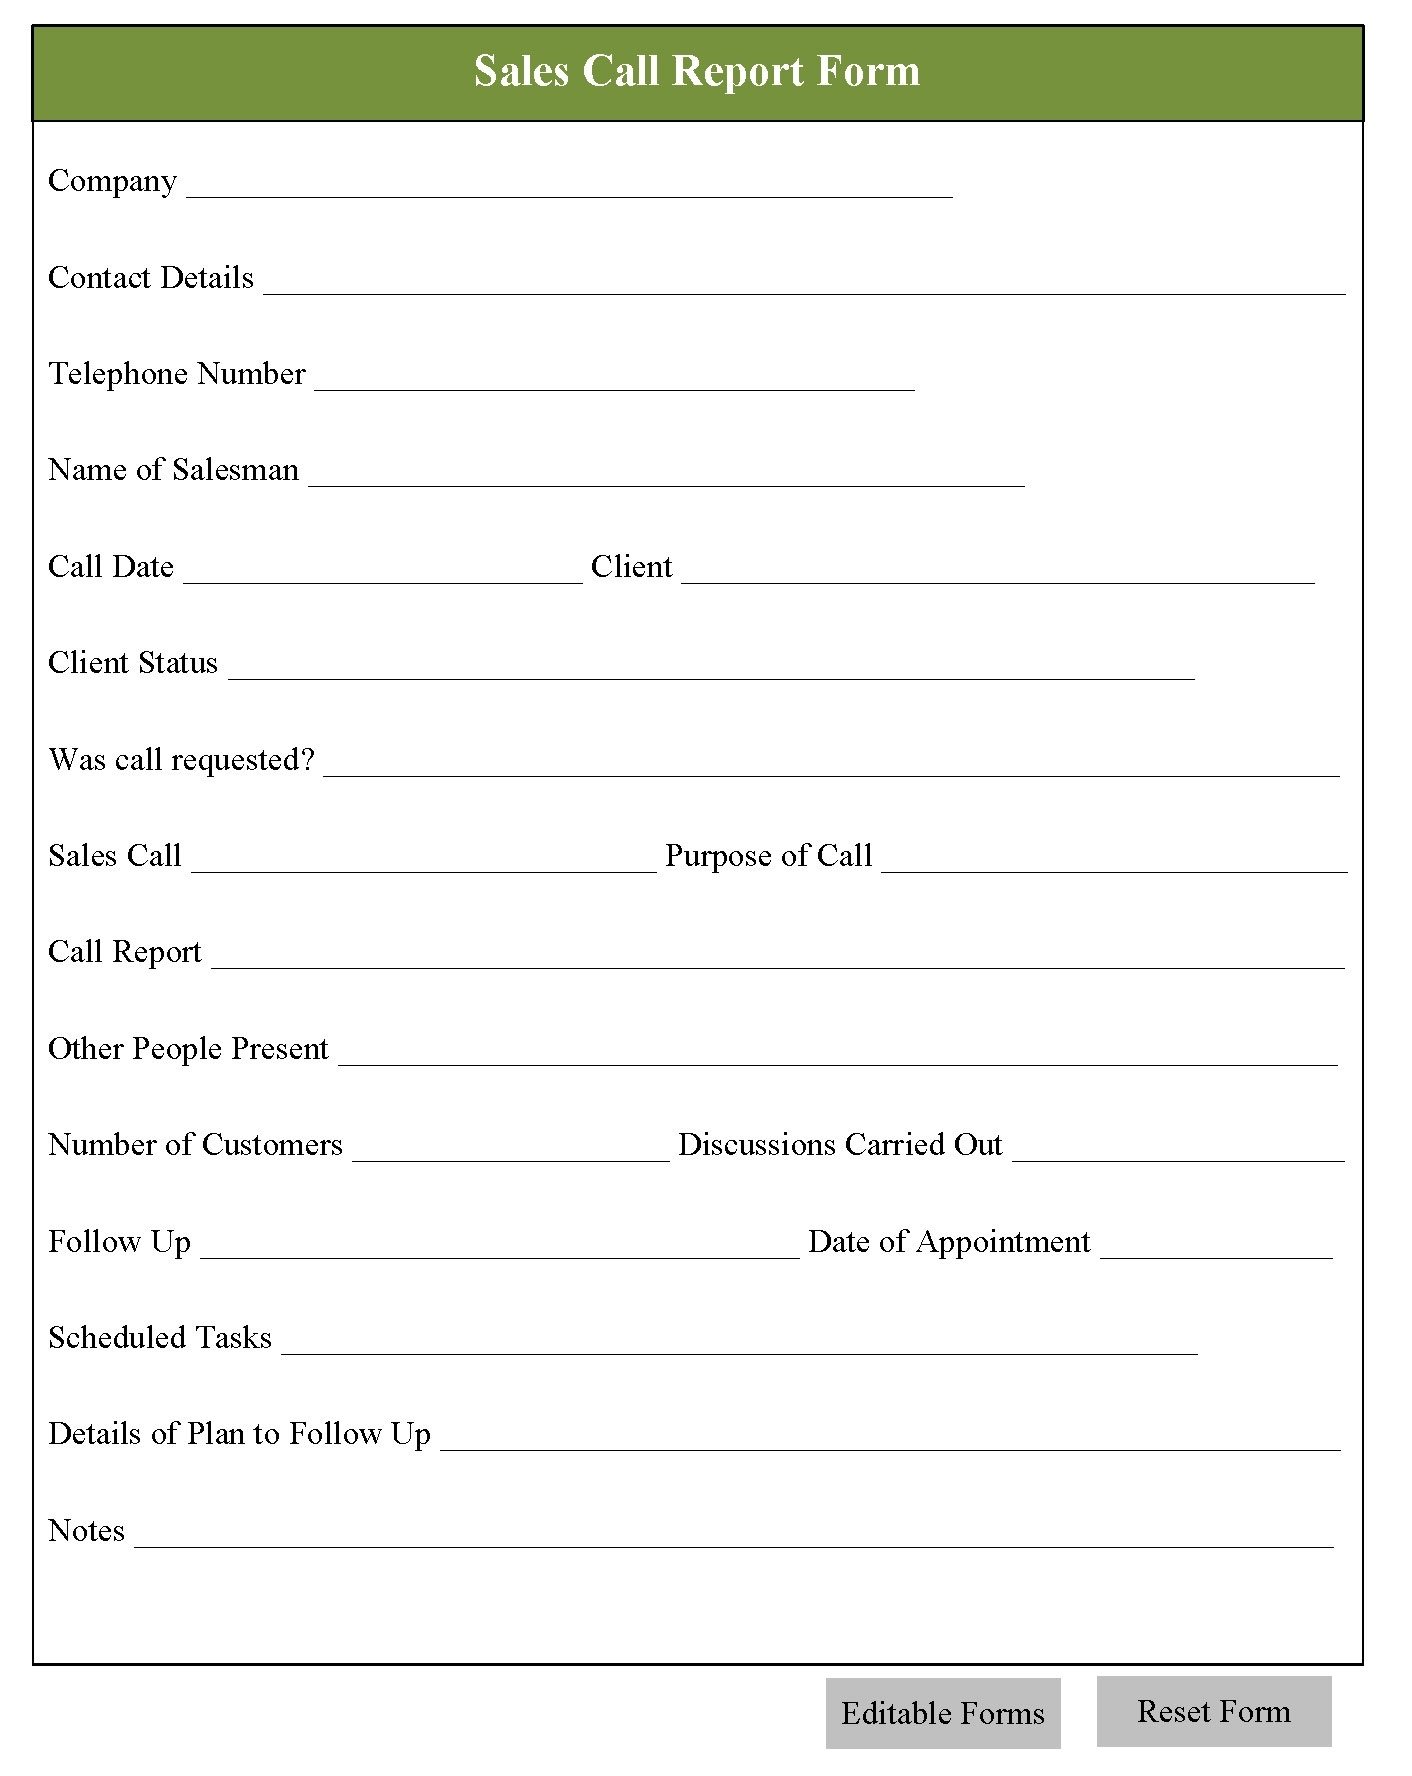 Sales Call Report Form - Editable Forms within Sales Call Reports Templates Free